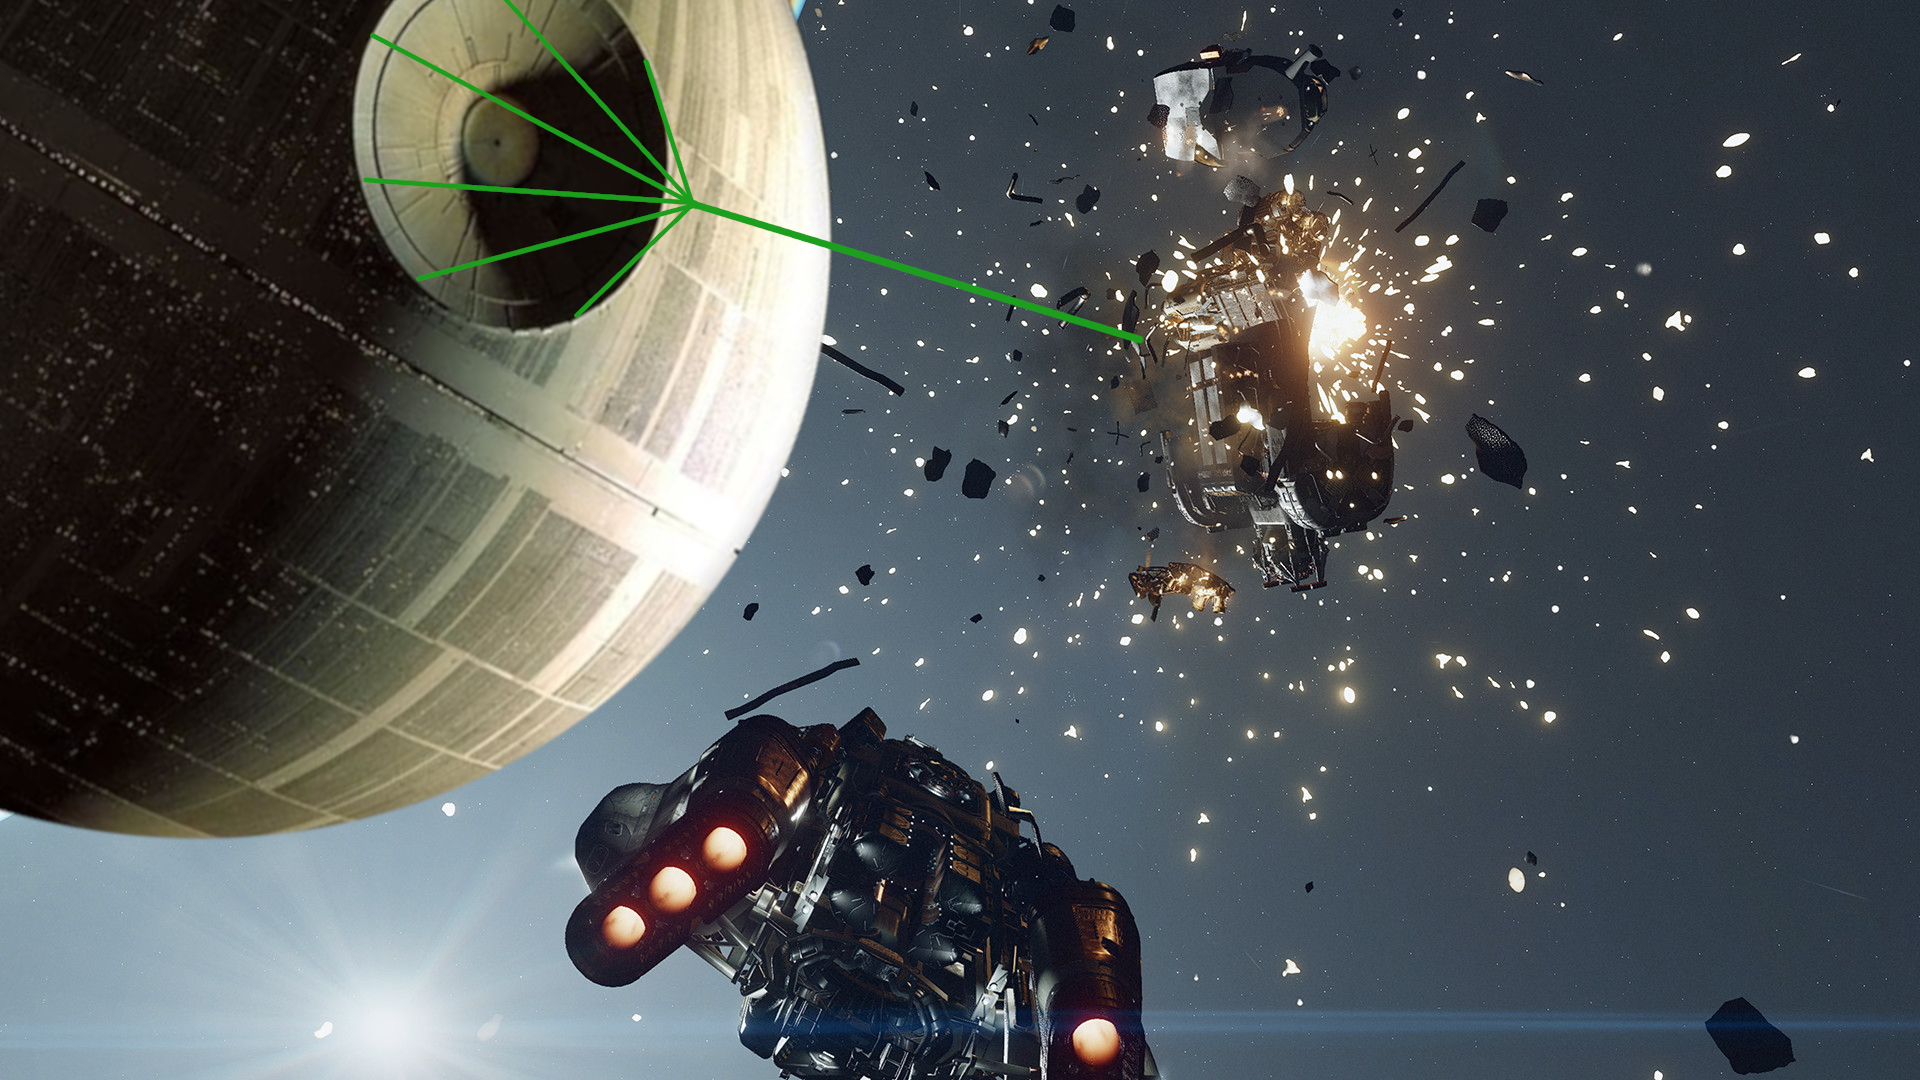 Edited Starfield screenshot with an added Deathstar blowing up a ship